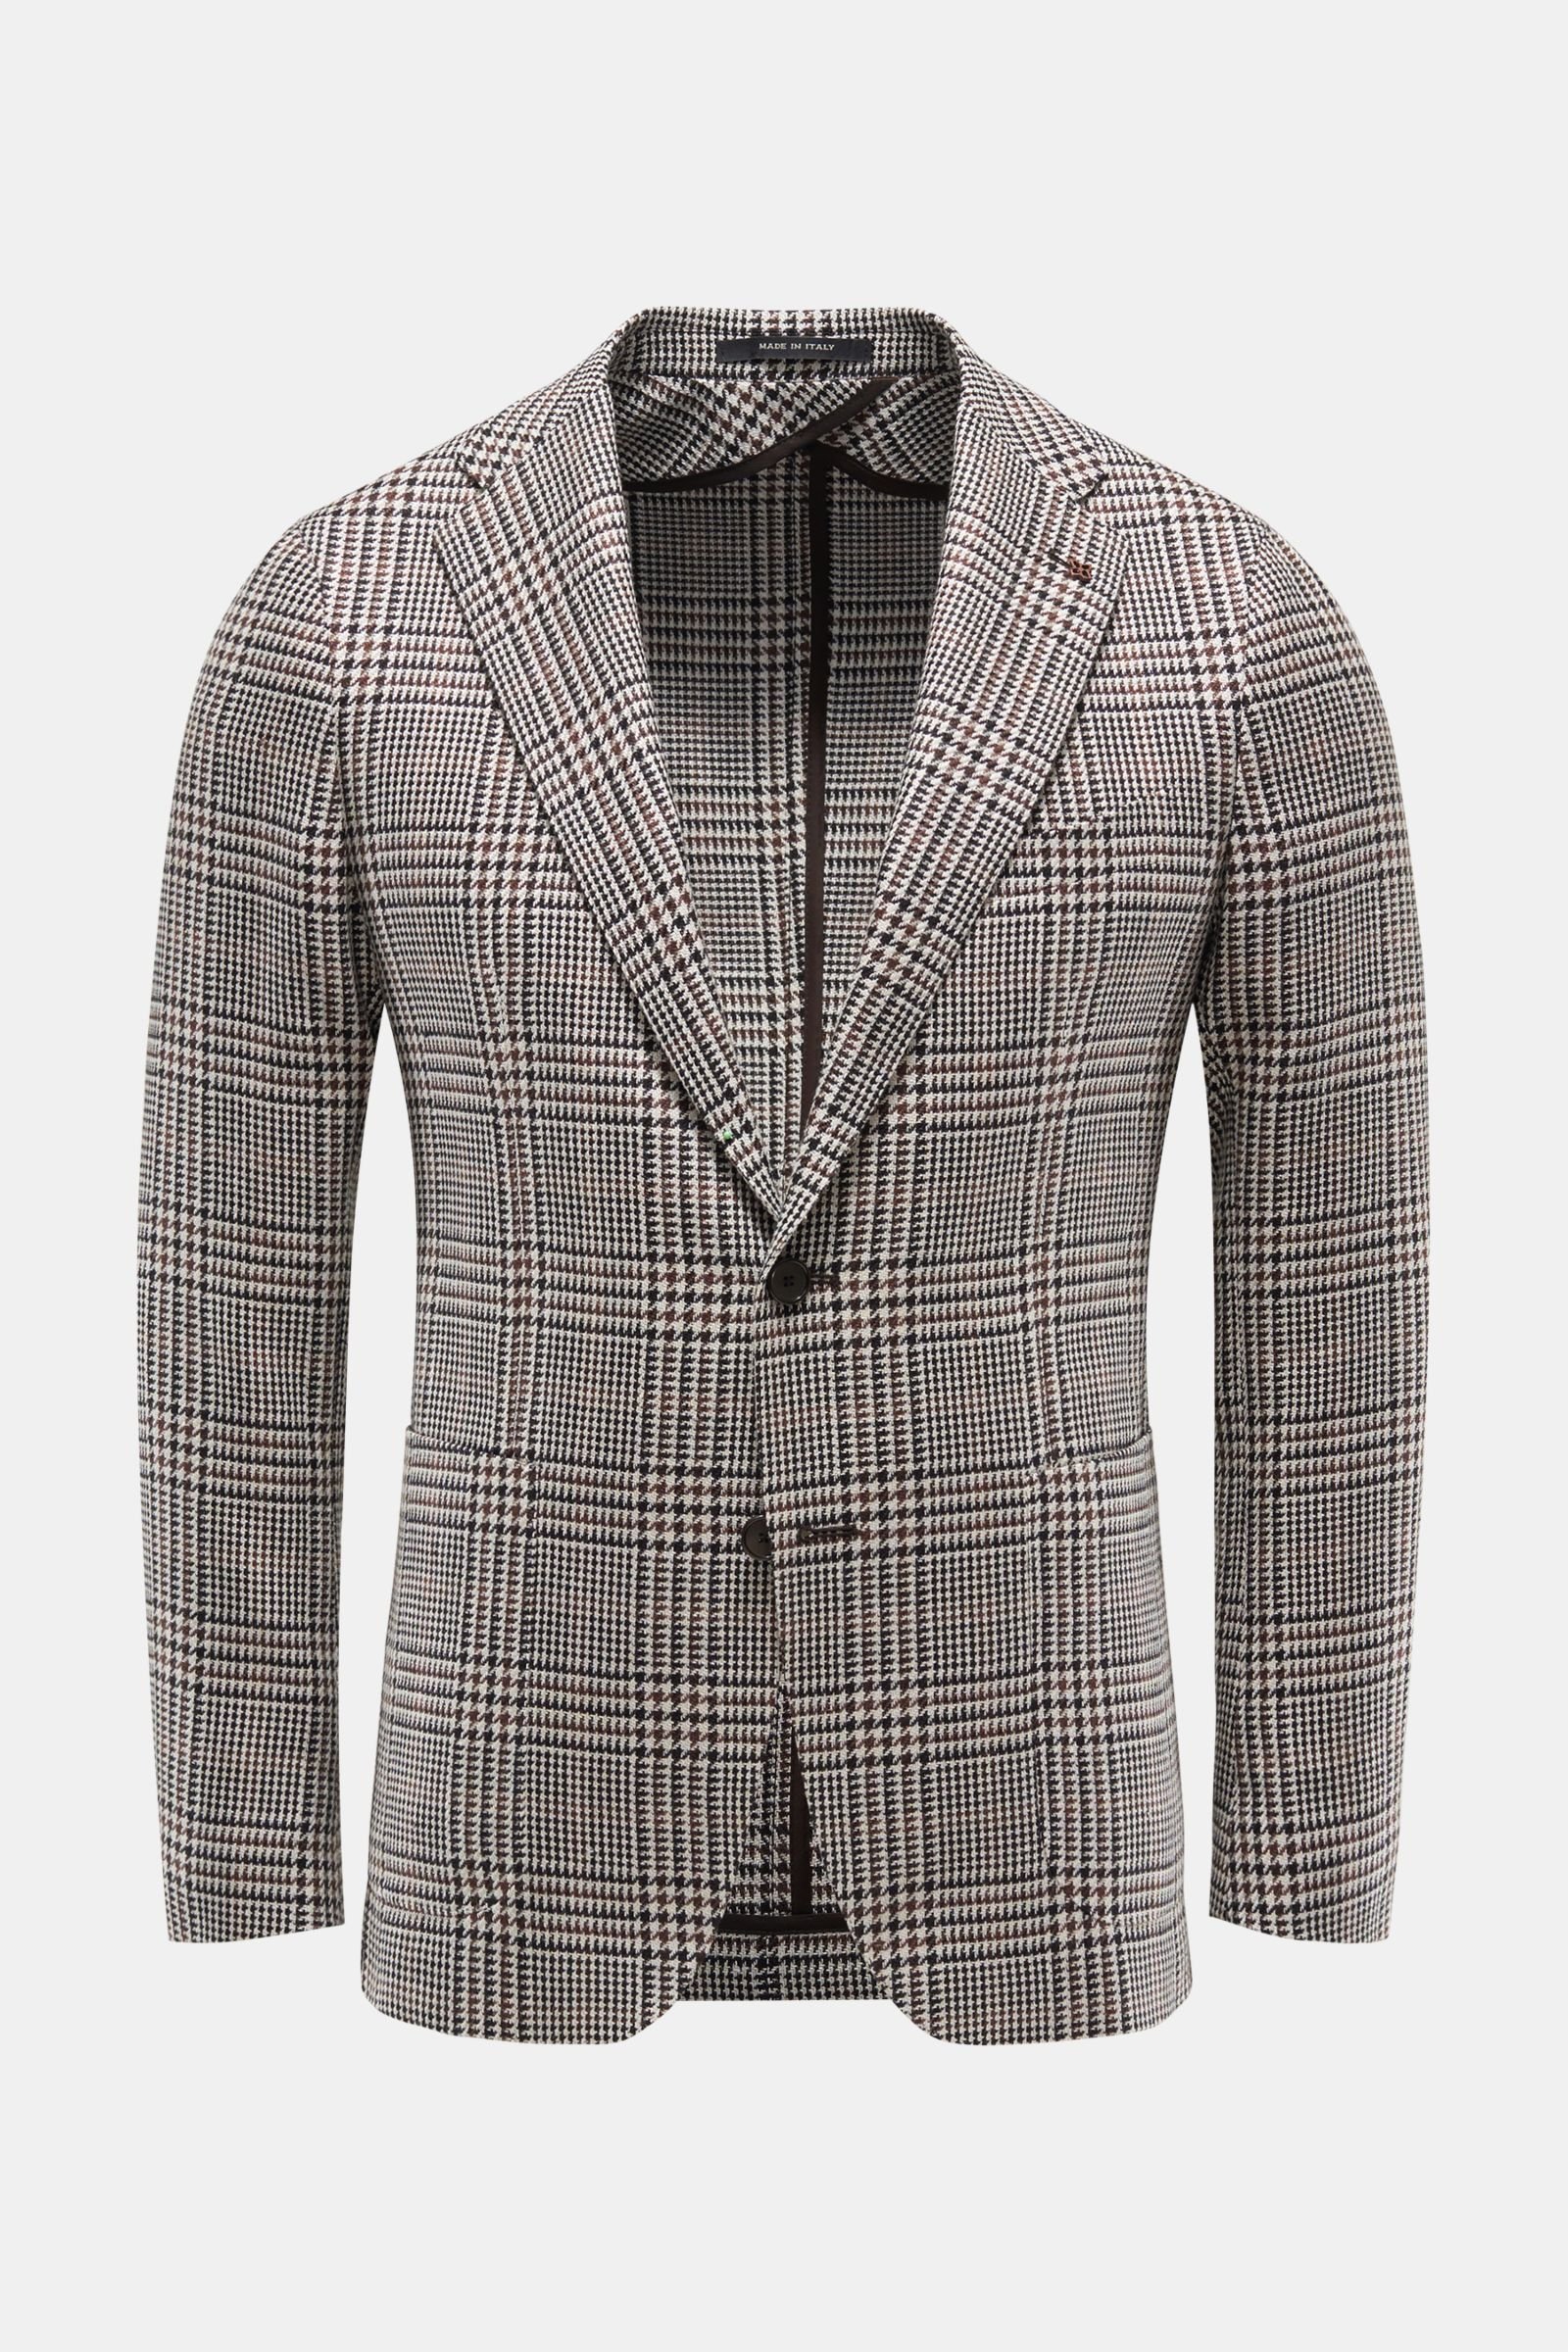 Smart-casual jacket black/dark brown/off-white checked